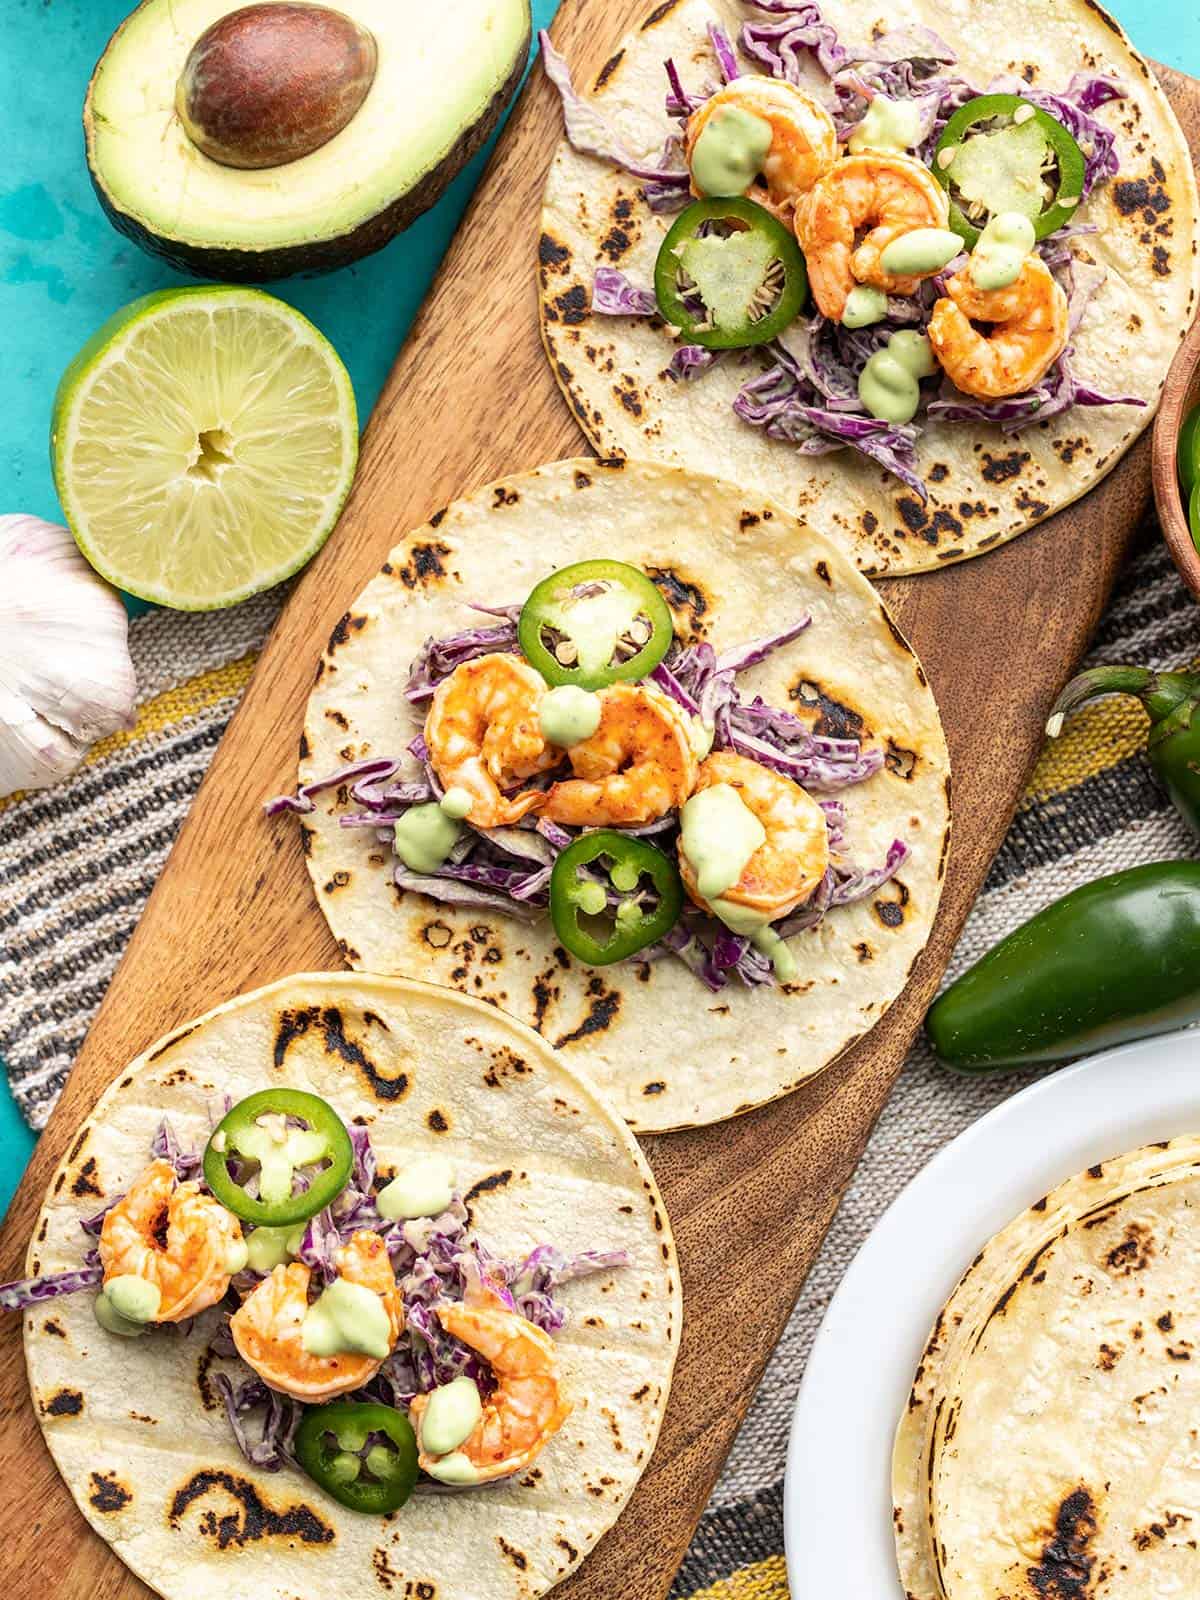 Three Tajín Shrimp Tacos open faced on a wooden board, ingredients on the sides